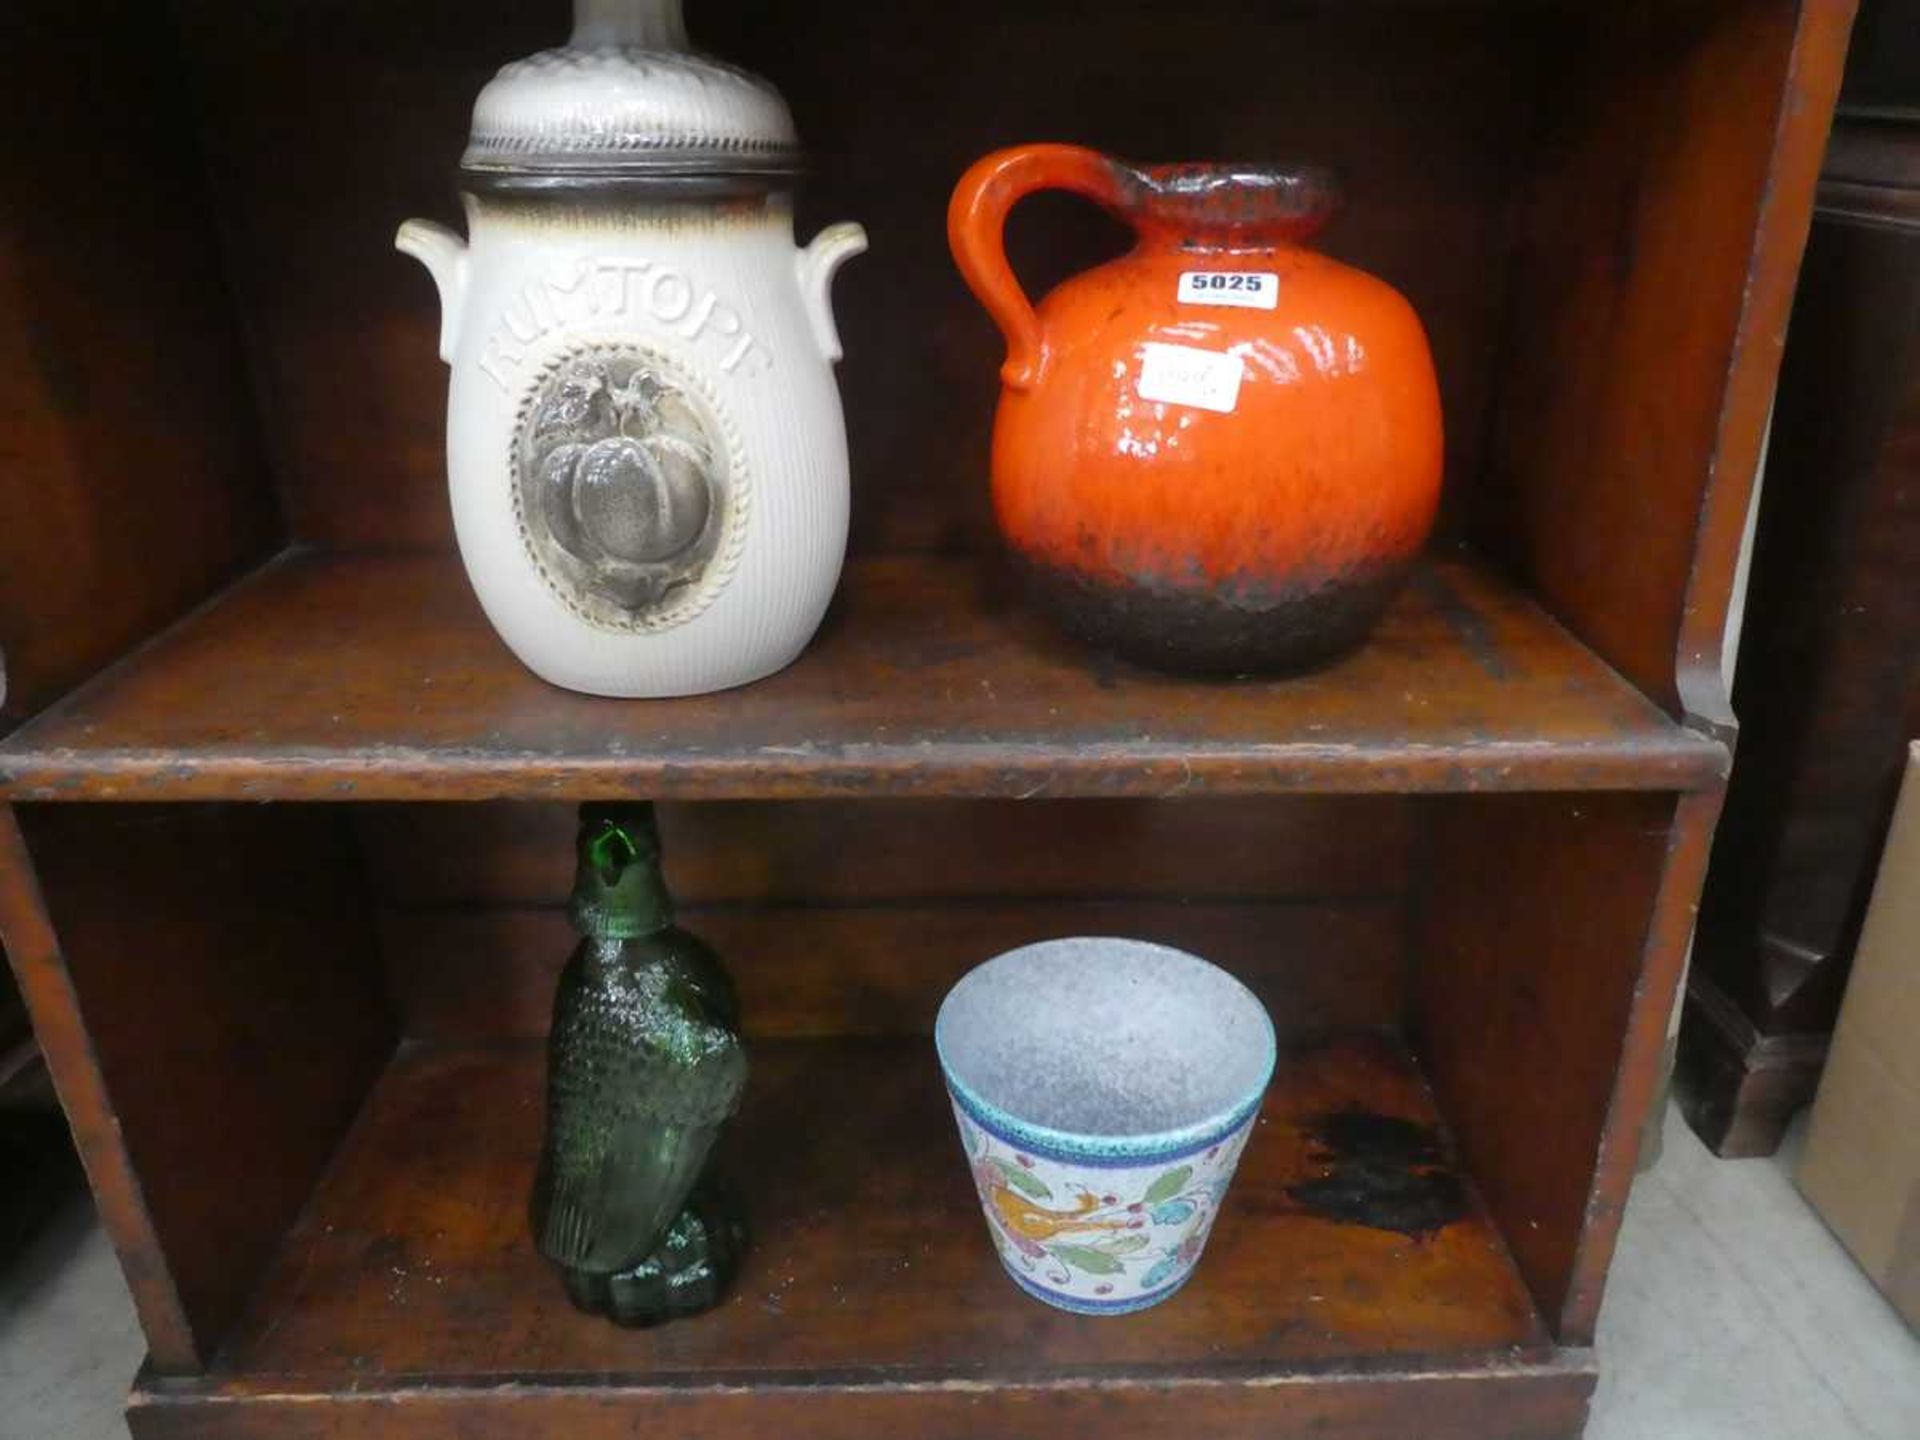 Rumtopf biscuit barrel, and eagle shaped decanter plus studio pottery bowl and jug